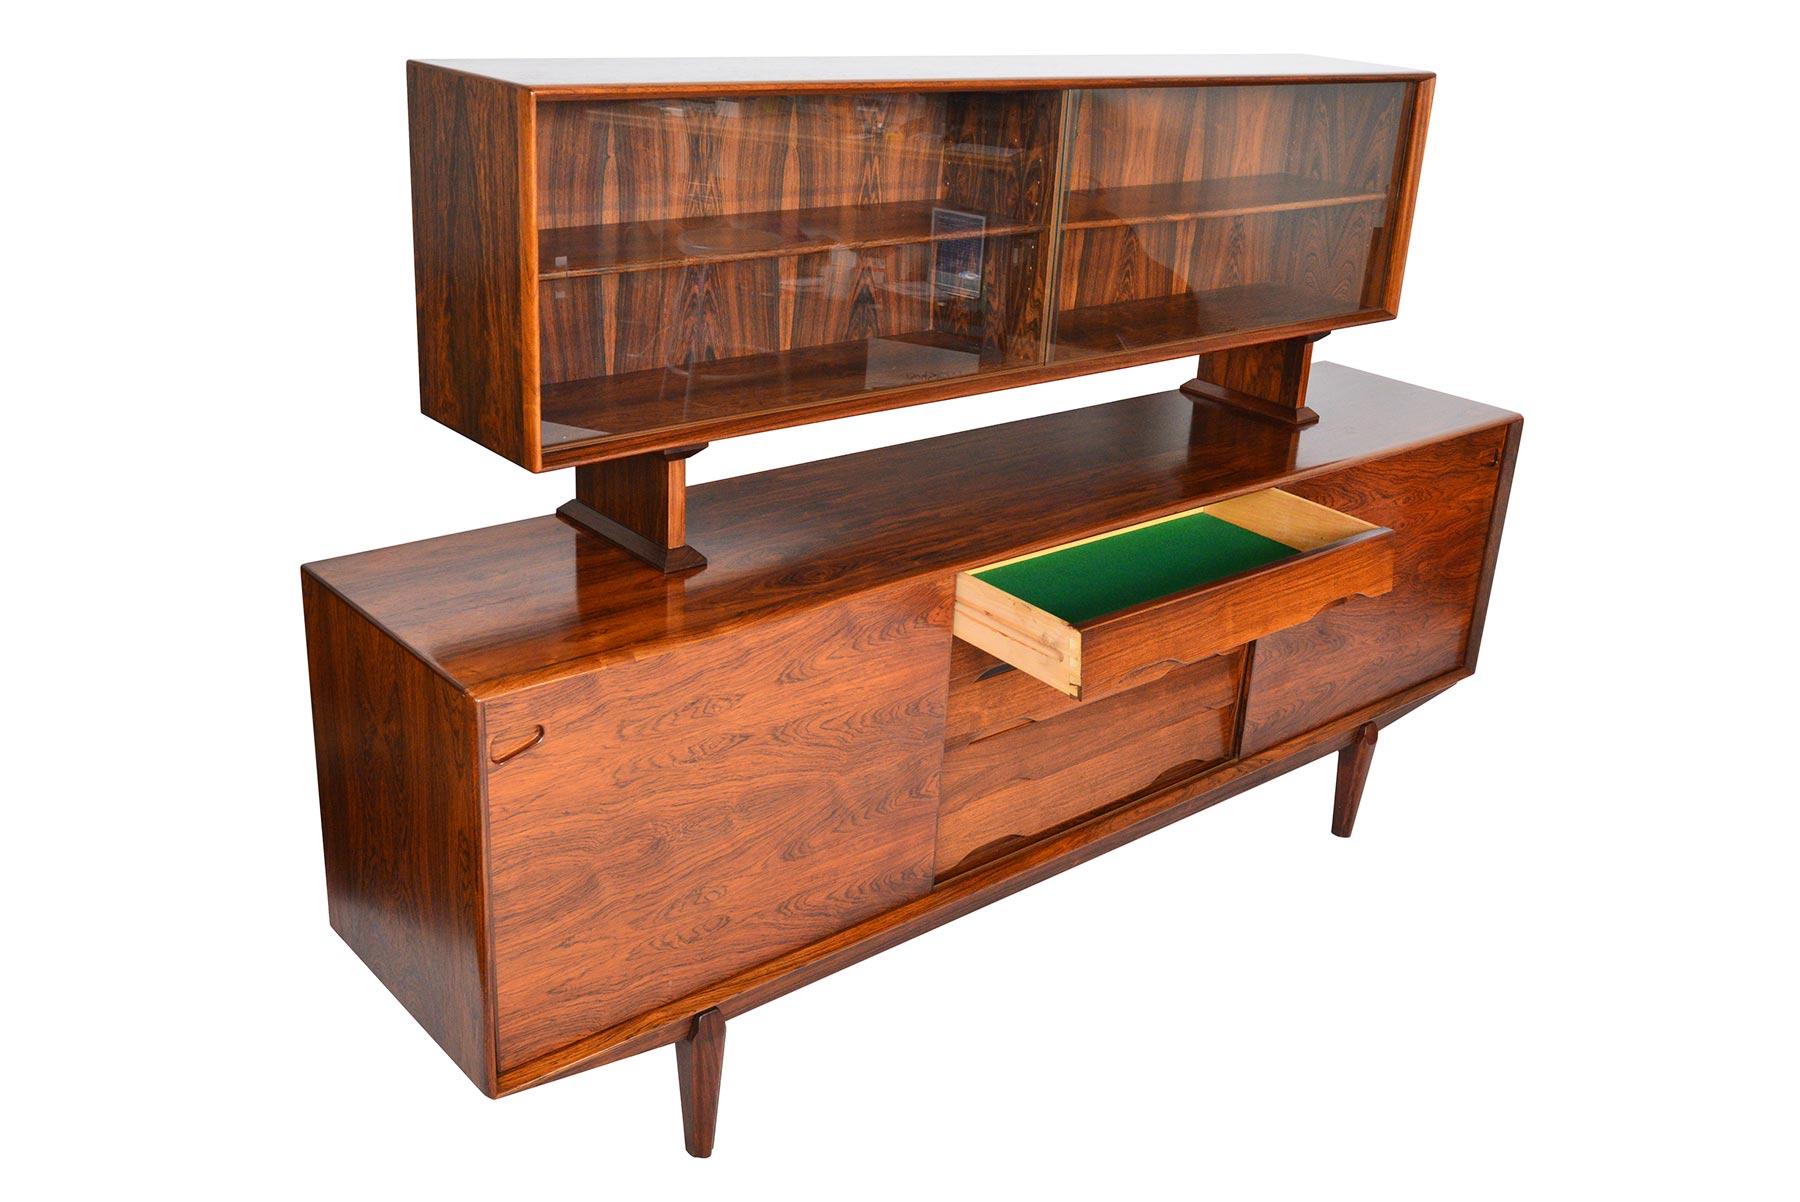 This beautiful Danish modern Brazilian rosewood credenza model 65 was manufactured by Skovby in the 1960s. Finished on all sides in rosewood, this piece would make an excellent room divider! The original hutch rests atop the credenza with